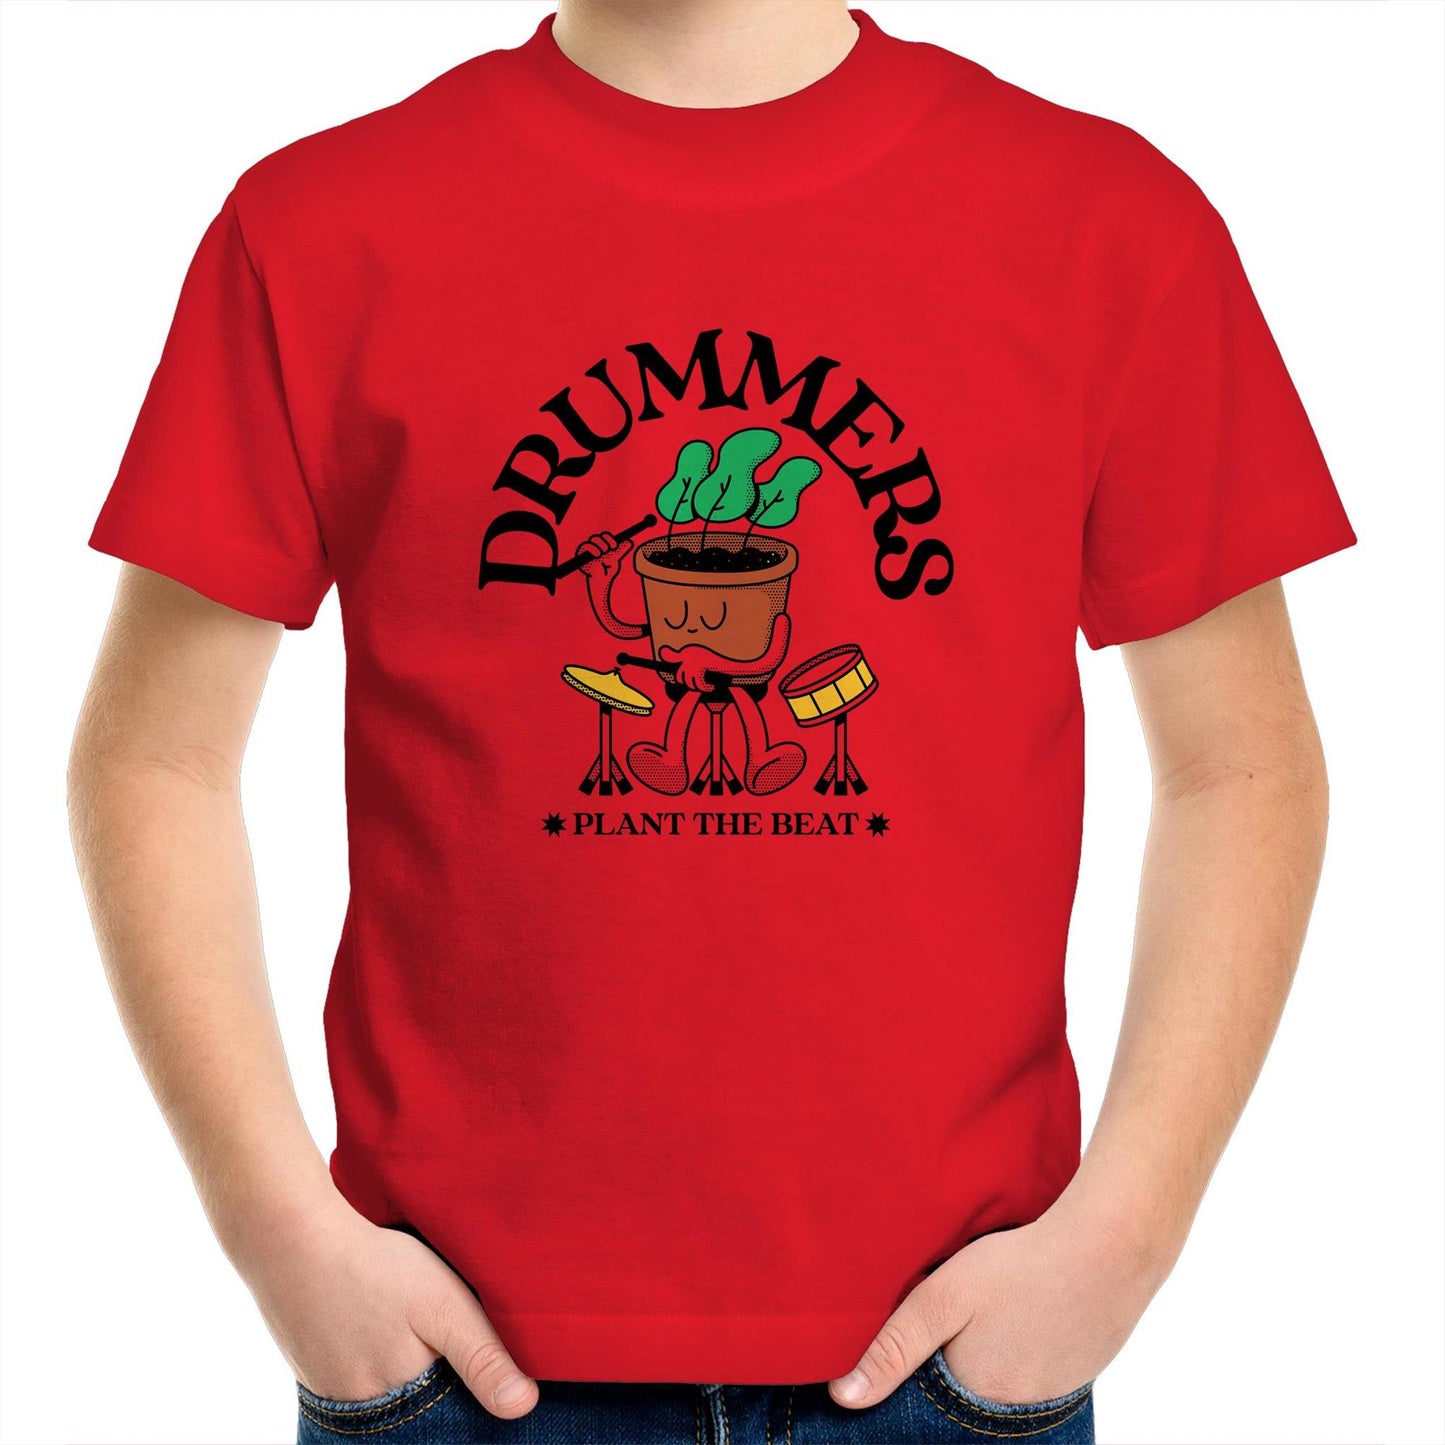 Drummers - Kids Youth Crew T-Shirt Red Kids Youth T-shirt Music Plants